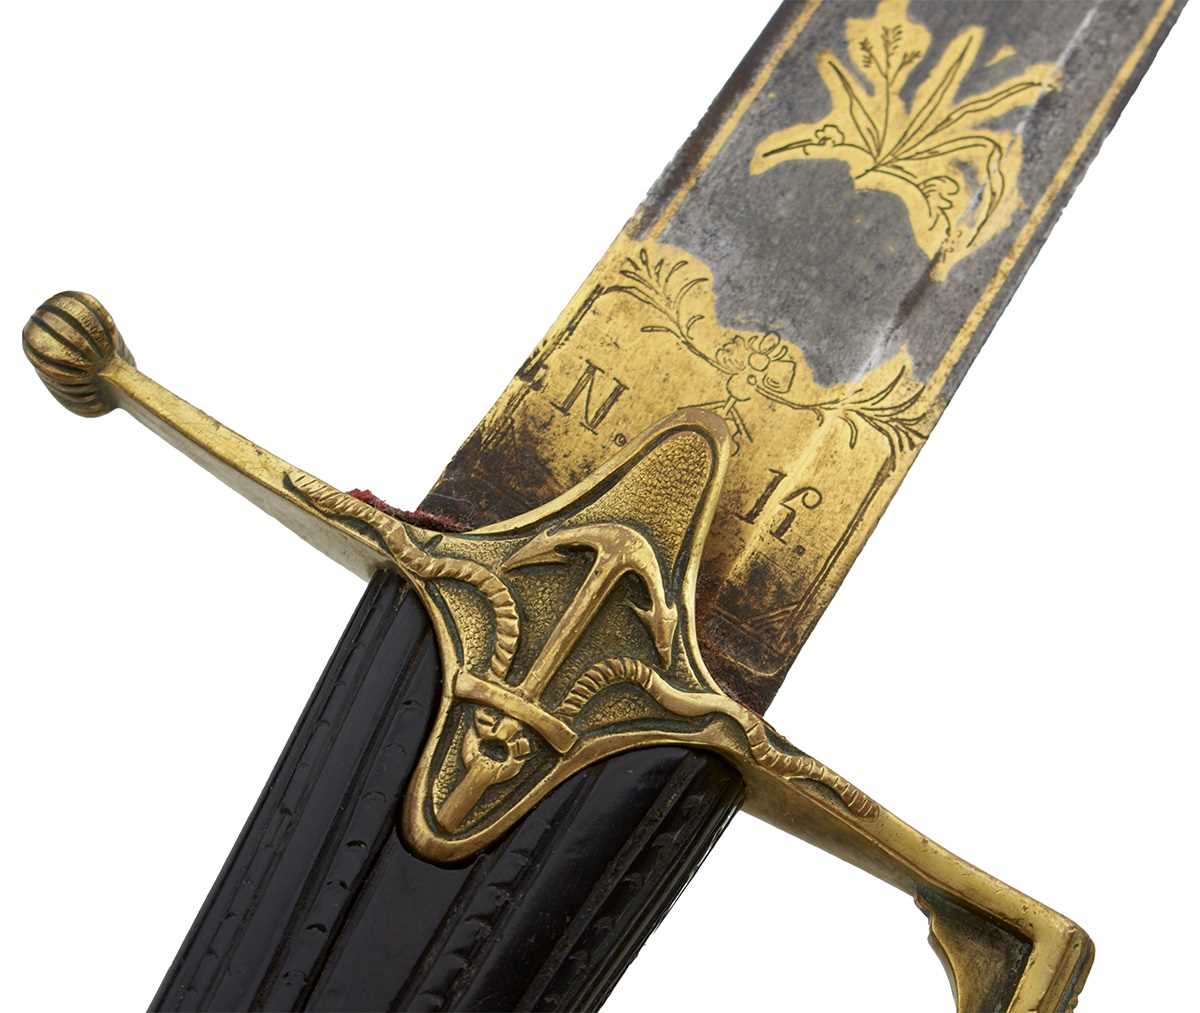 Lot A RARE FRENCH ANXII NAVAL OFFICER'S SWORD